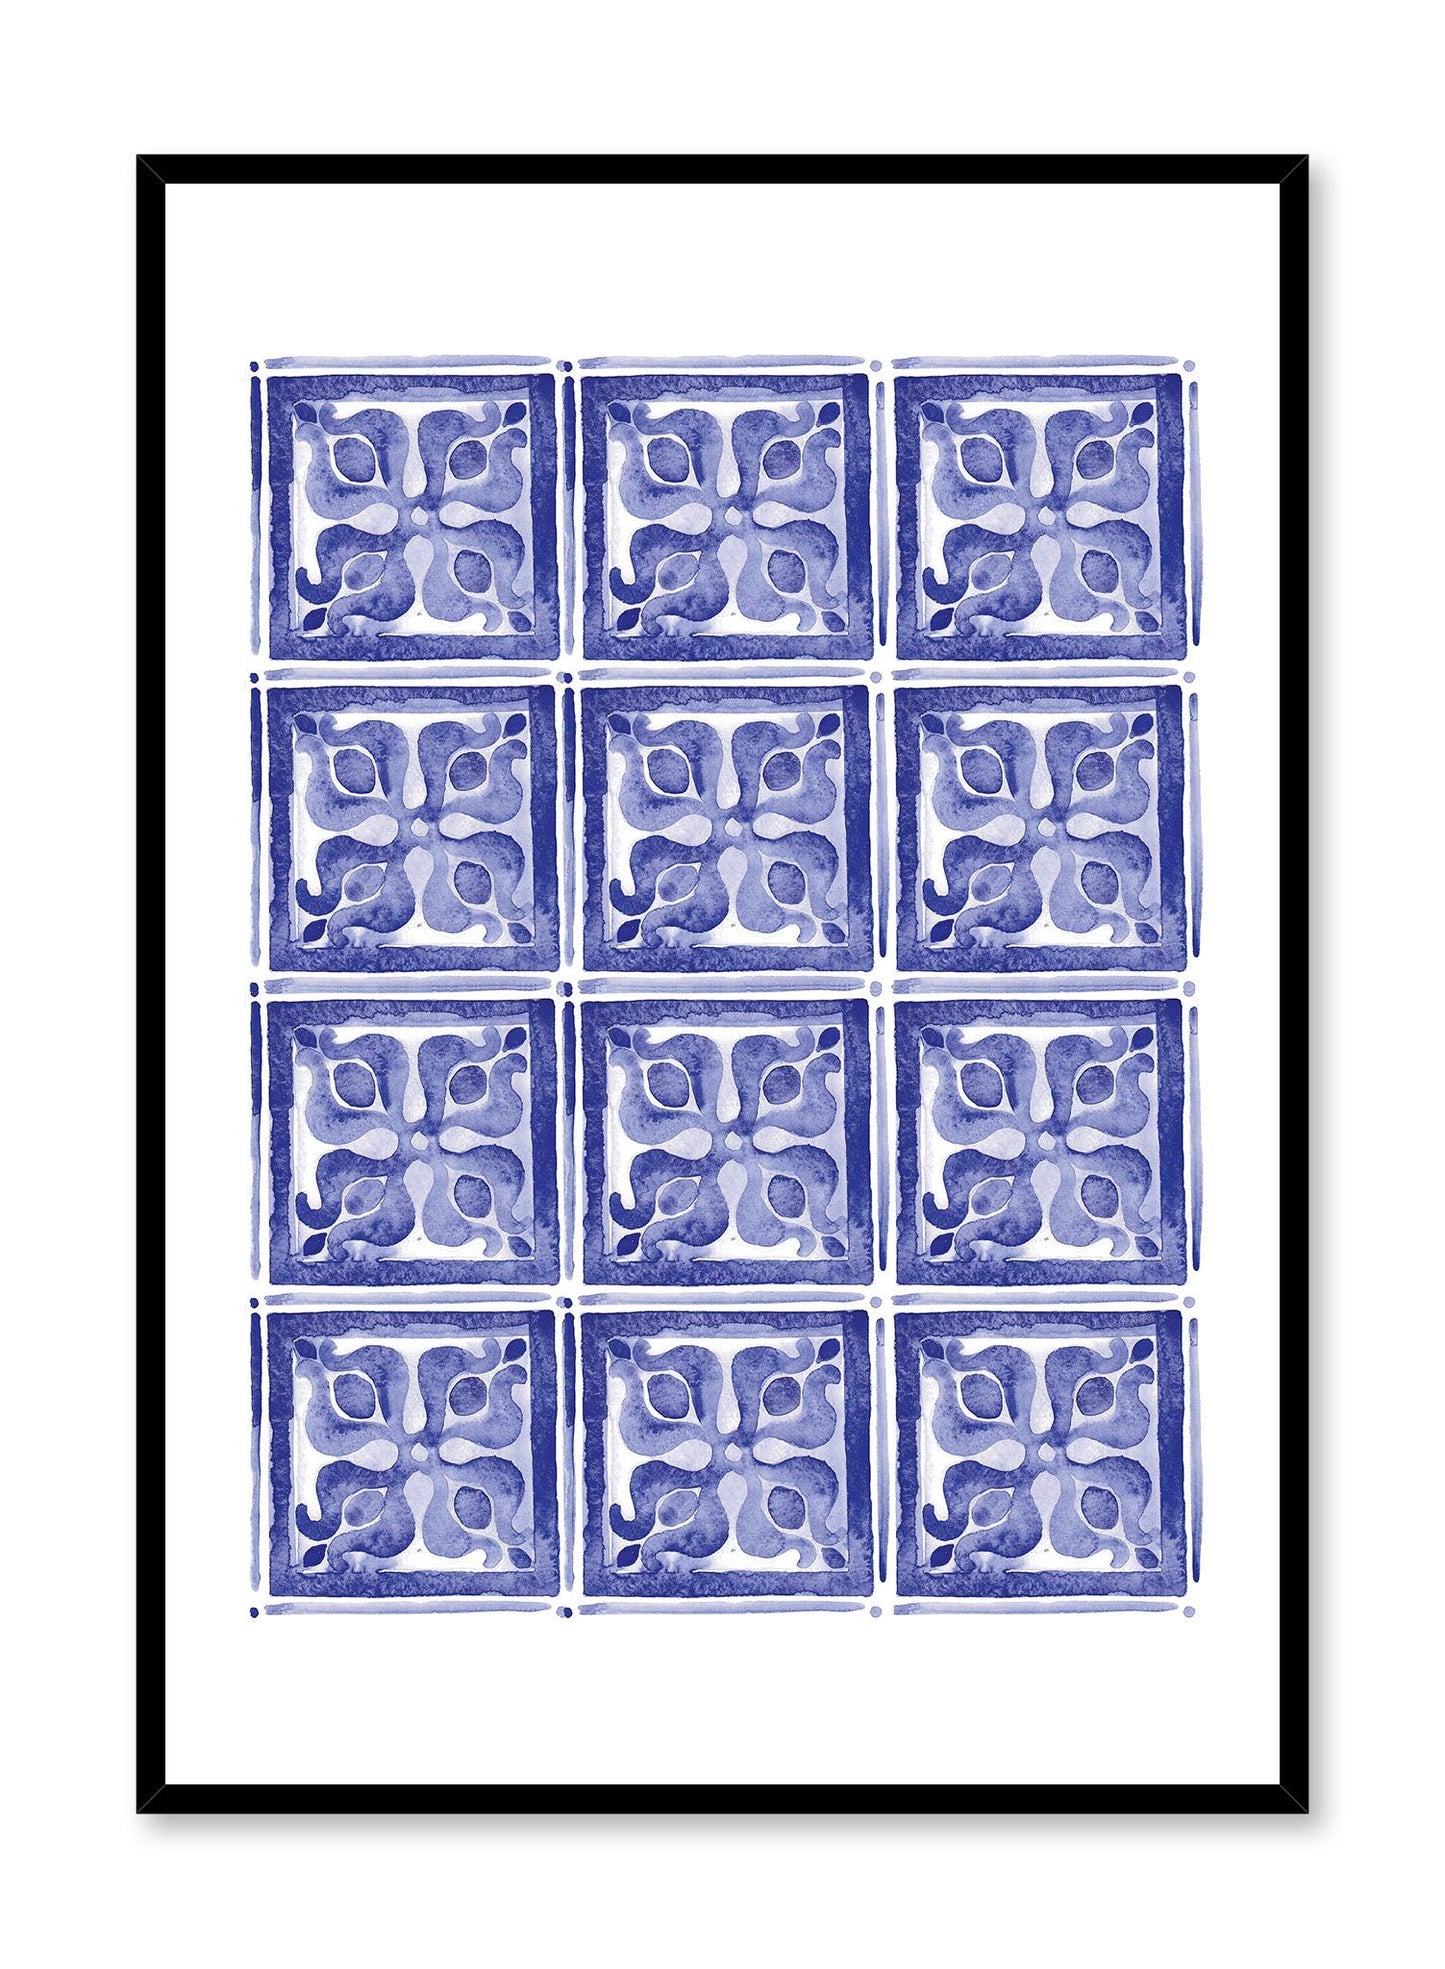 Mosaic is a minimalist illustration by Opposite Wall of twelve blue cubes with a floral pattern.